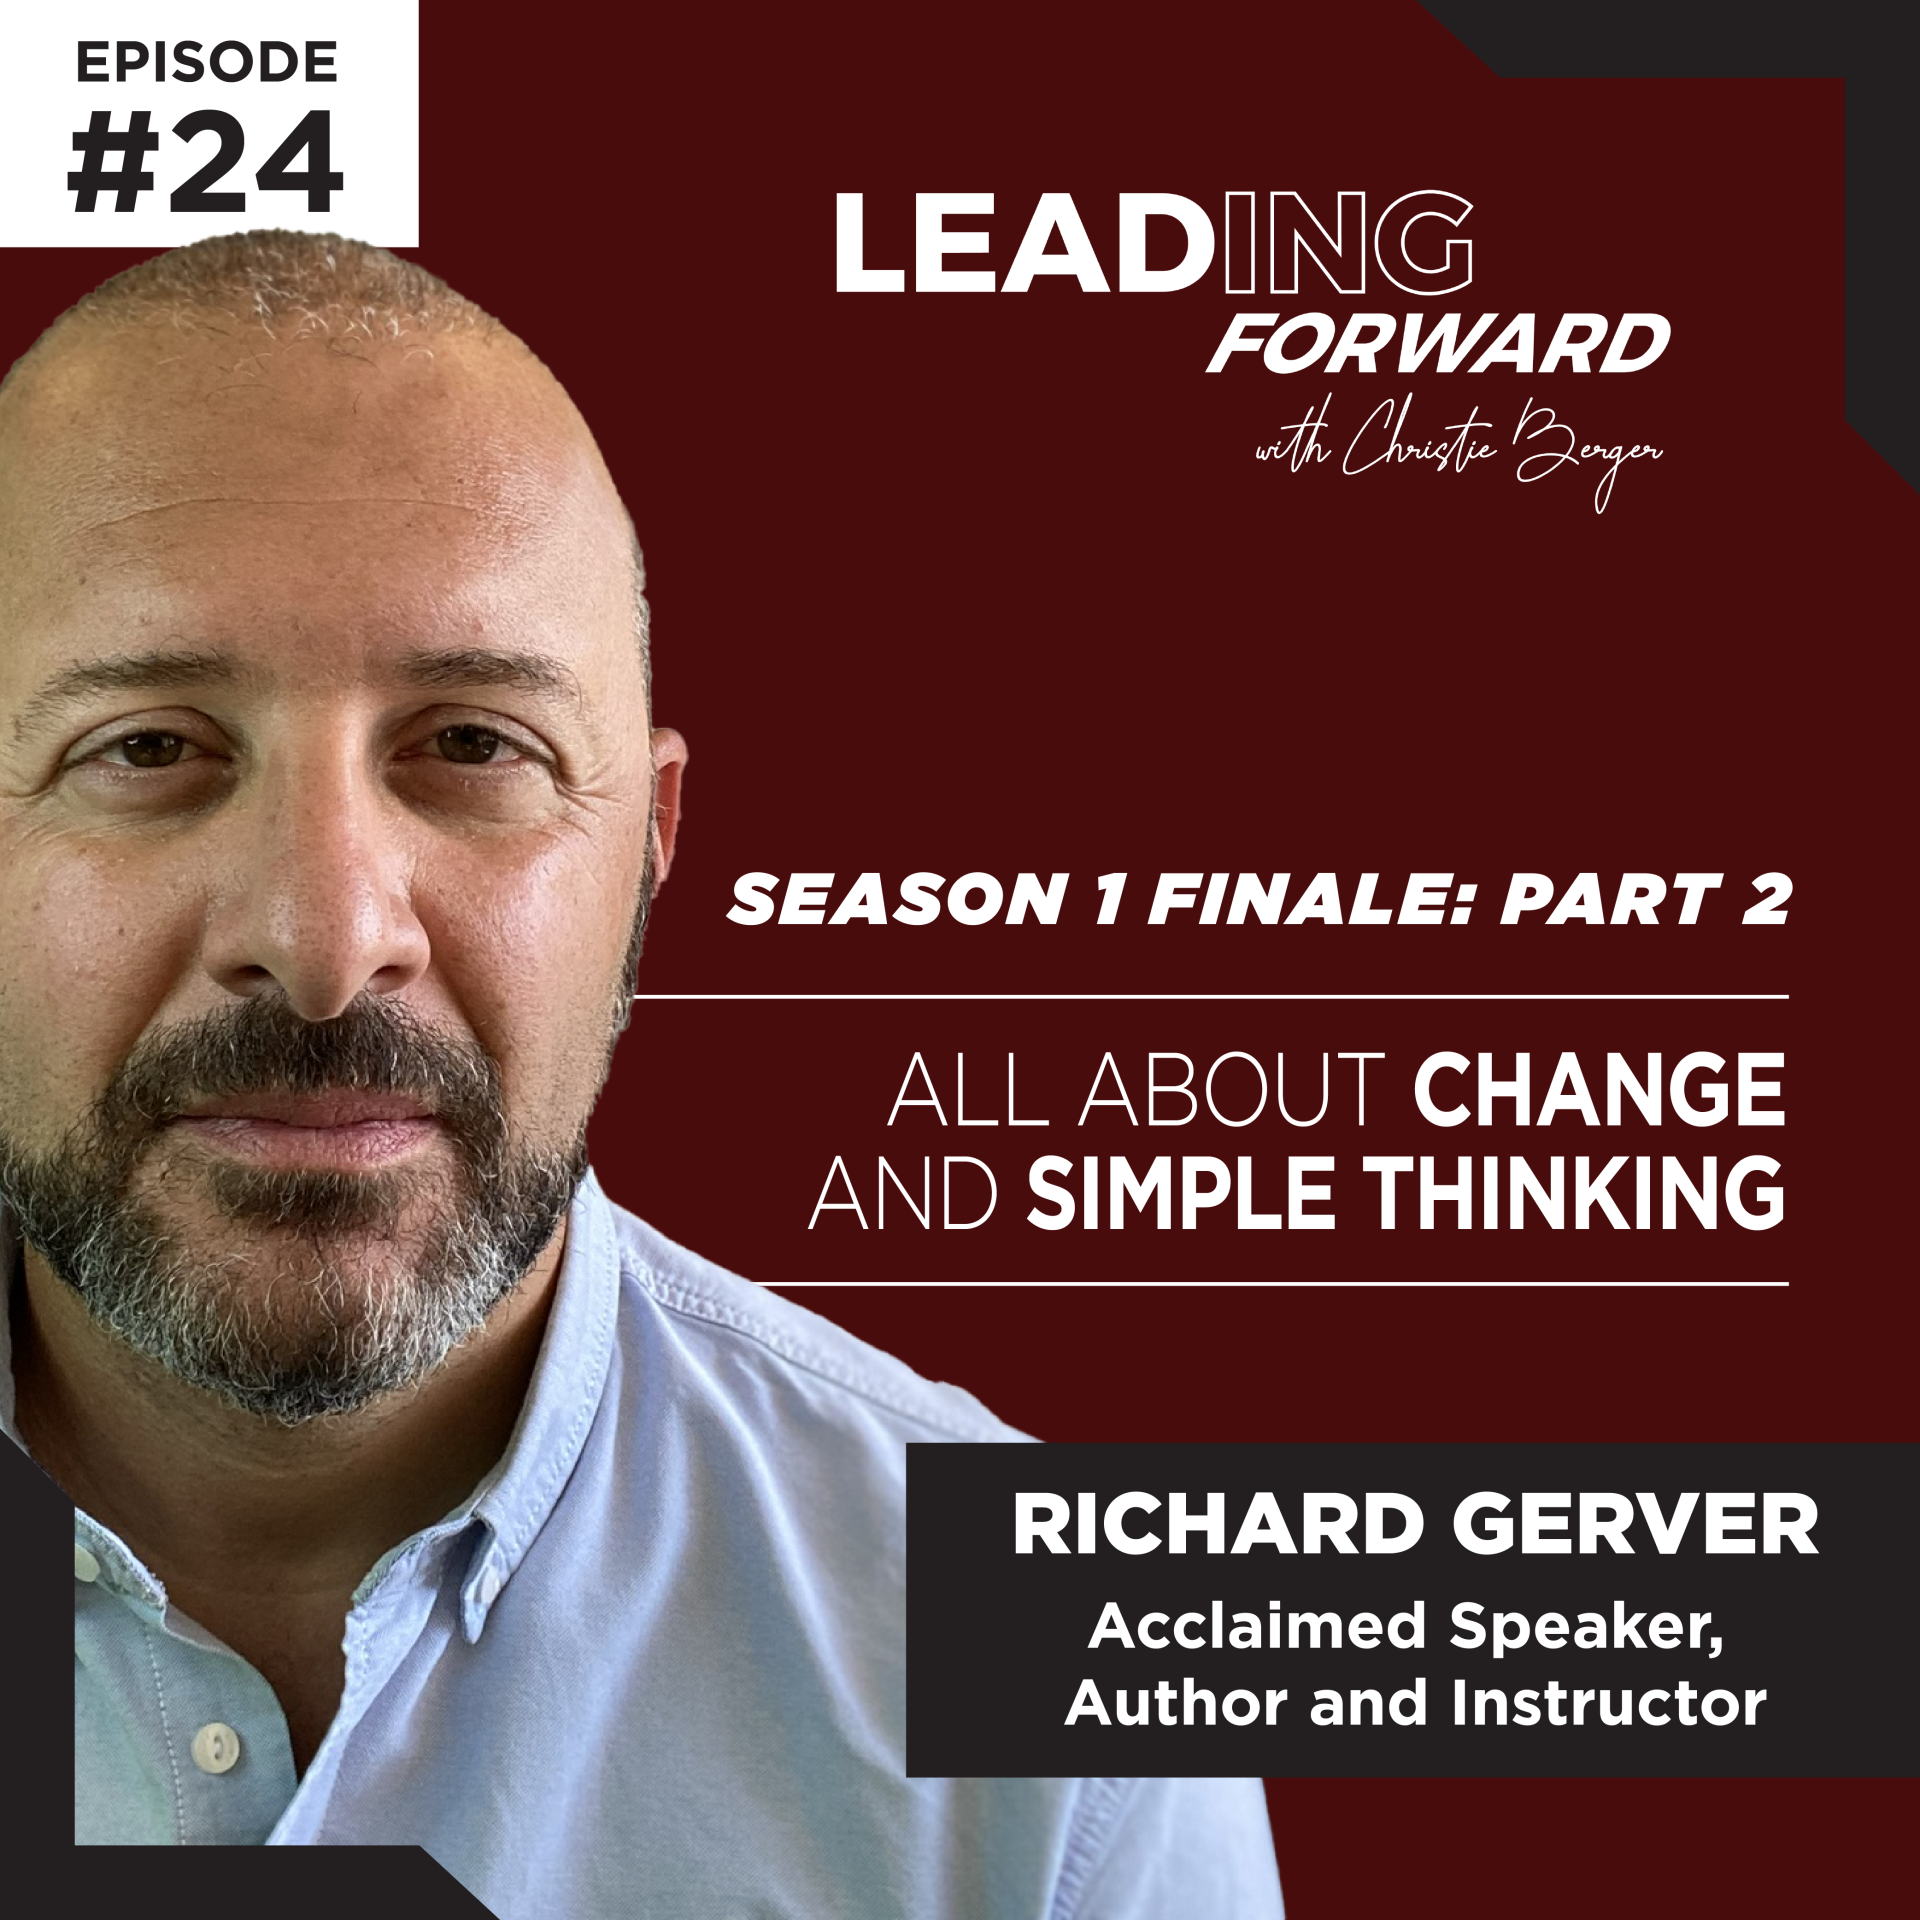 Richard Gerver in a blue button down shirt and discusses change & simple thinking on Leading Forward